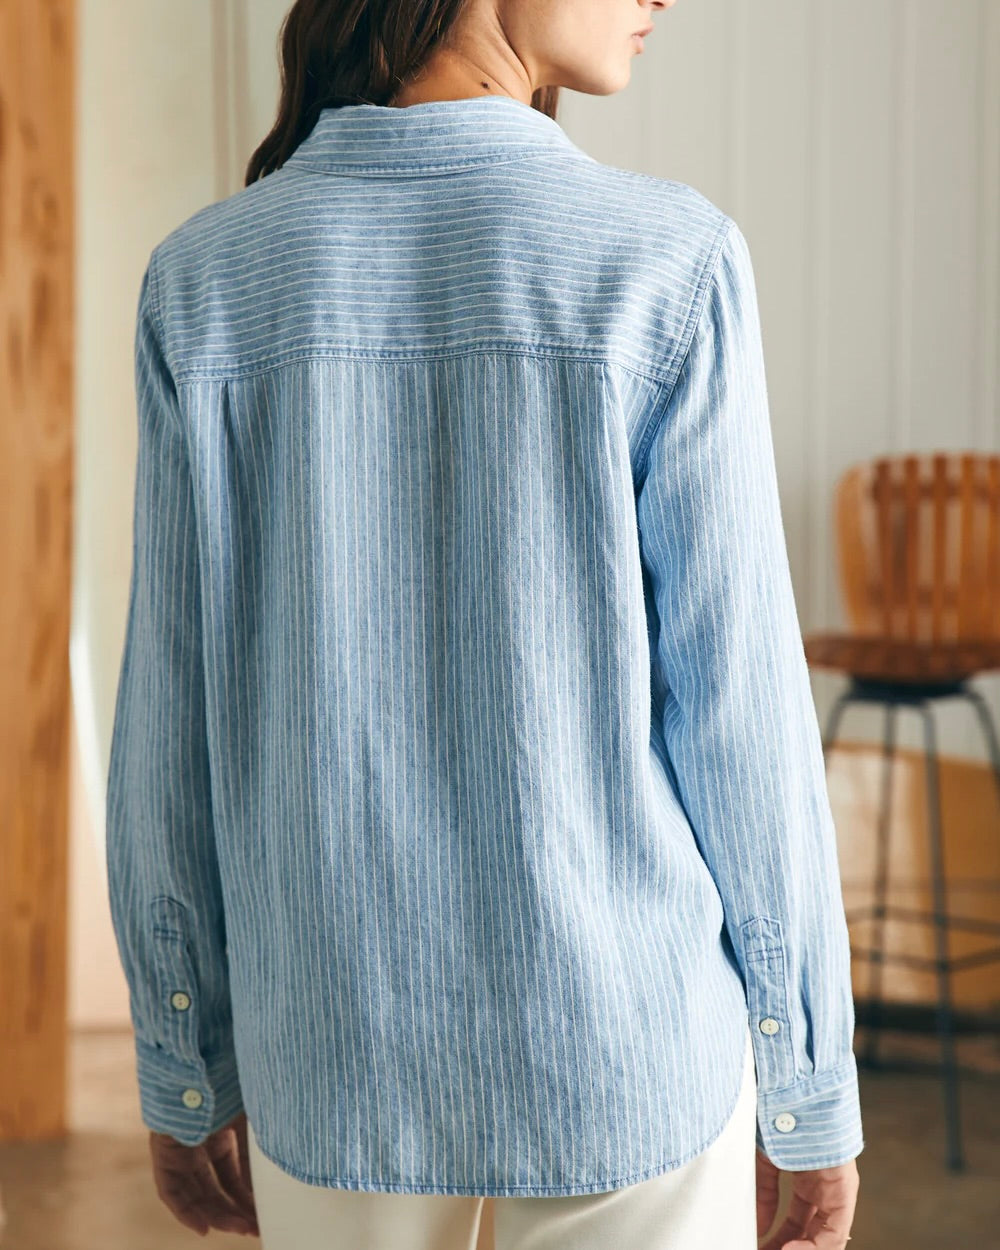 Faherty Tried and True Chambray Shirt